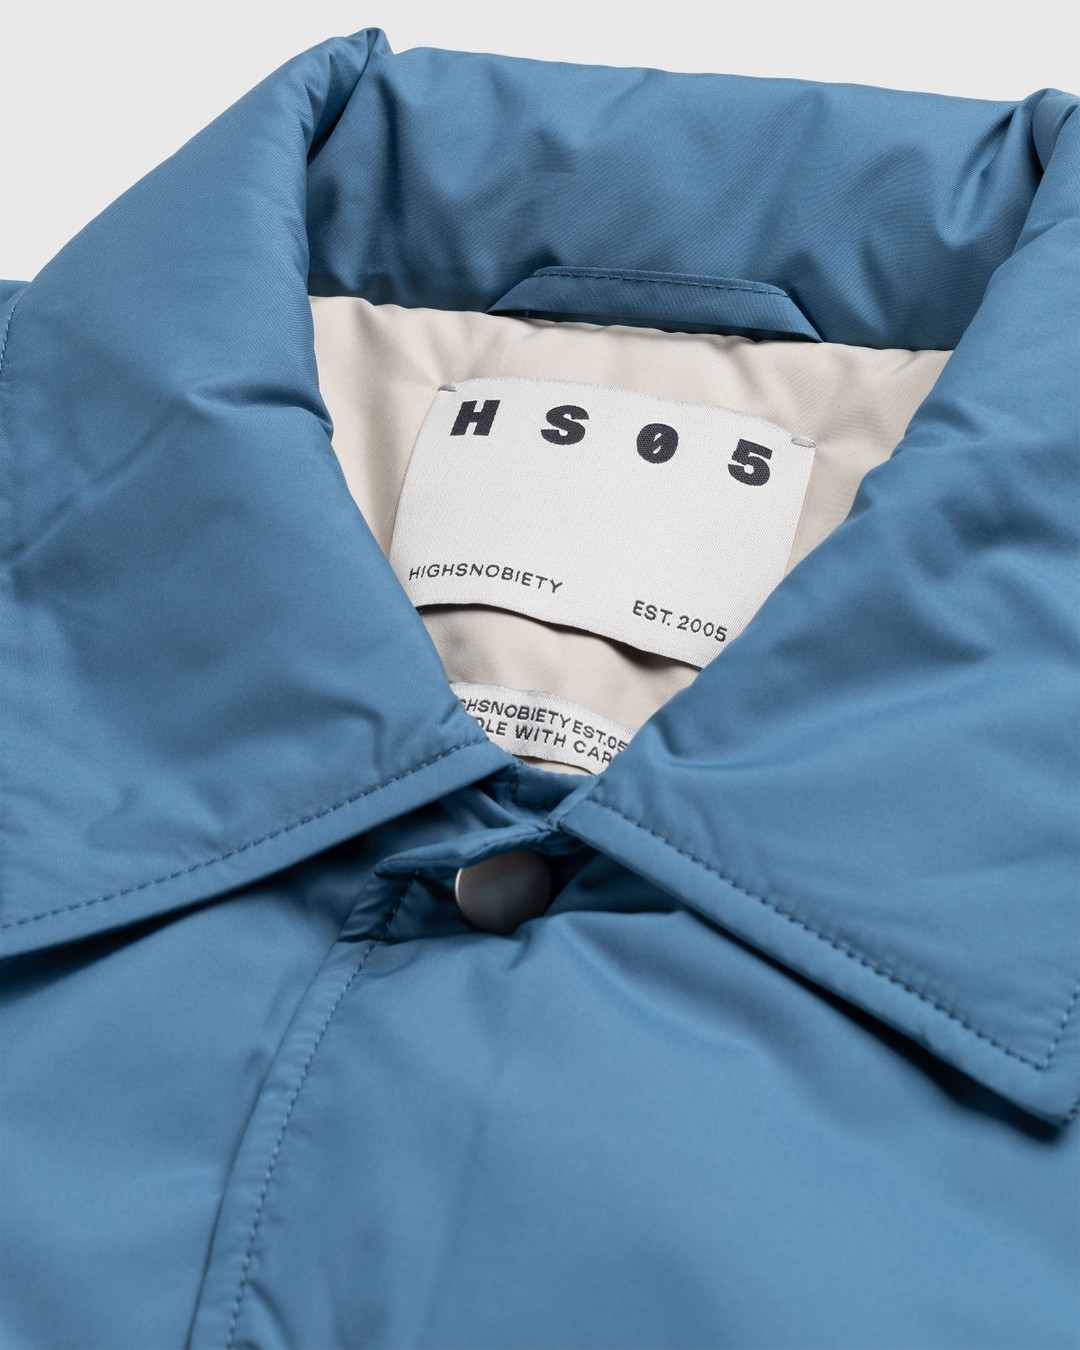 Highsnobiety HS05 – Light Insulated Eco-Poly Jacket Blue - Outerwear - Blue - Image 6